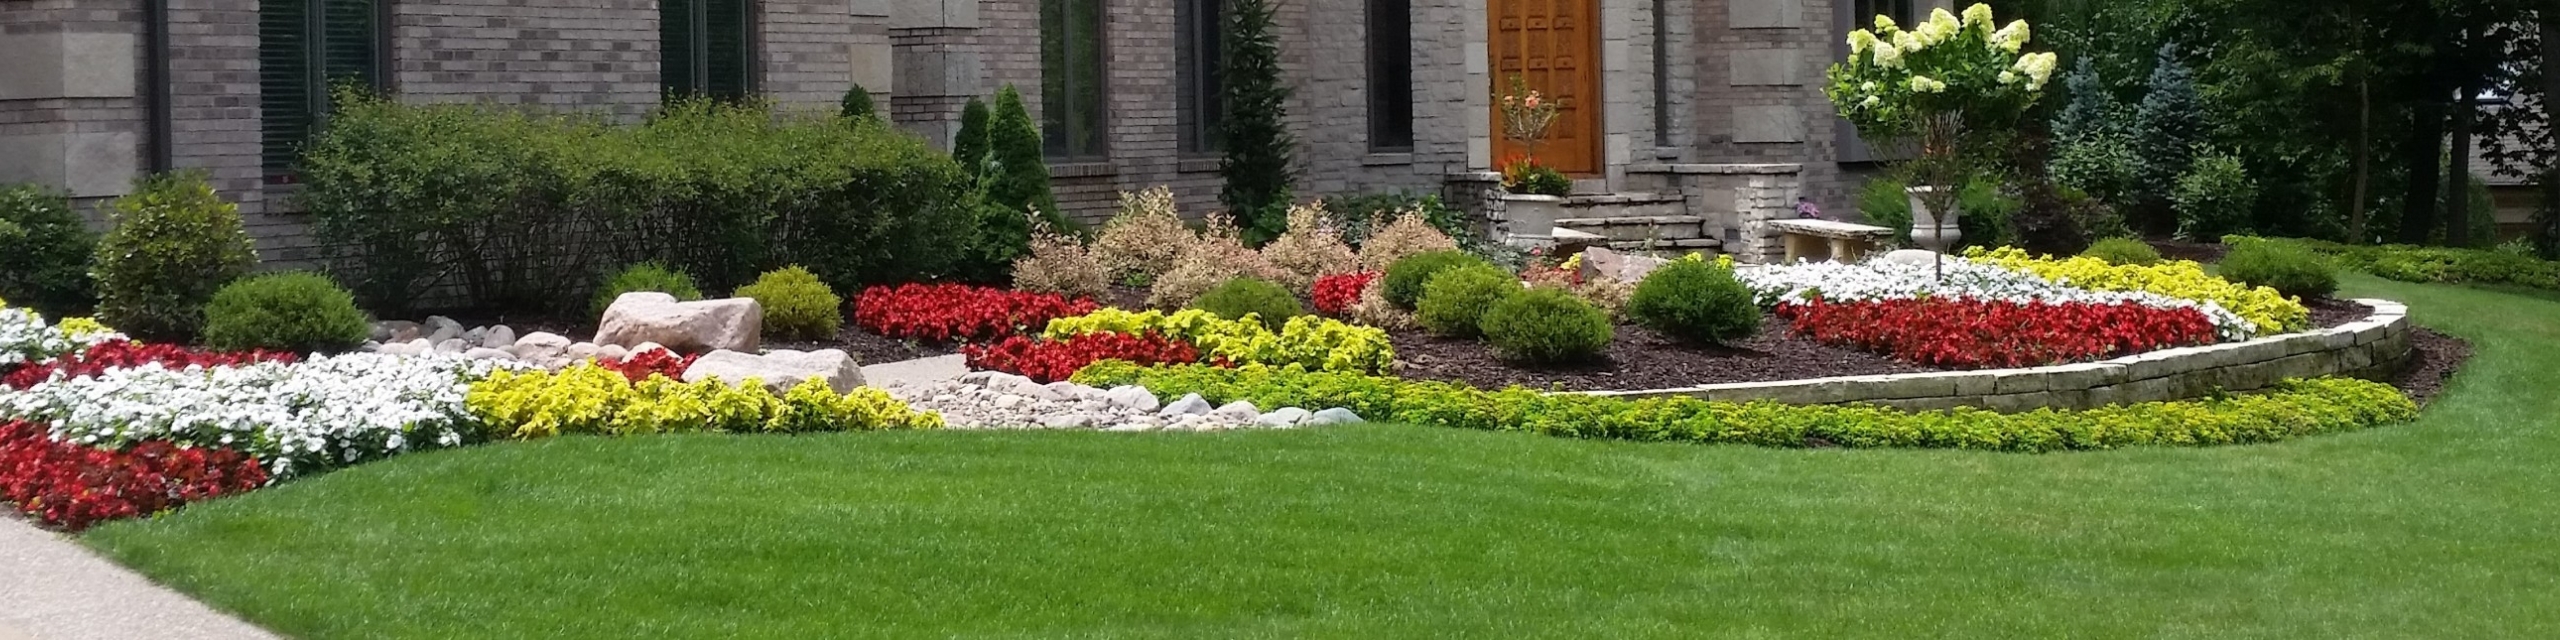 The landscaping in front of a two story home, alongside the home's garage. The red flowers and green bushes dot alongside the concrete walkway to the entrance of the home.